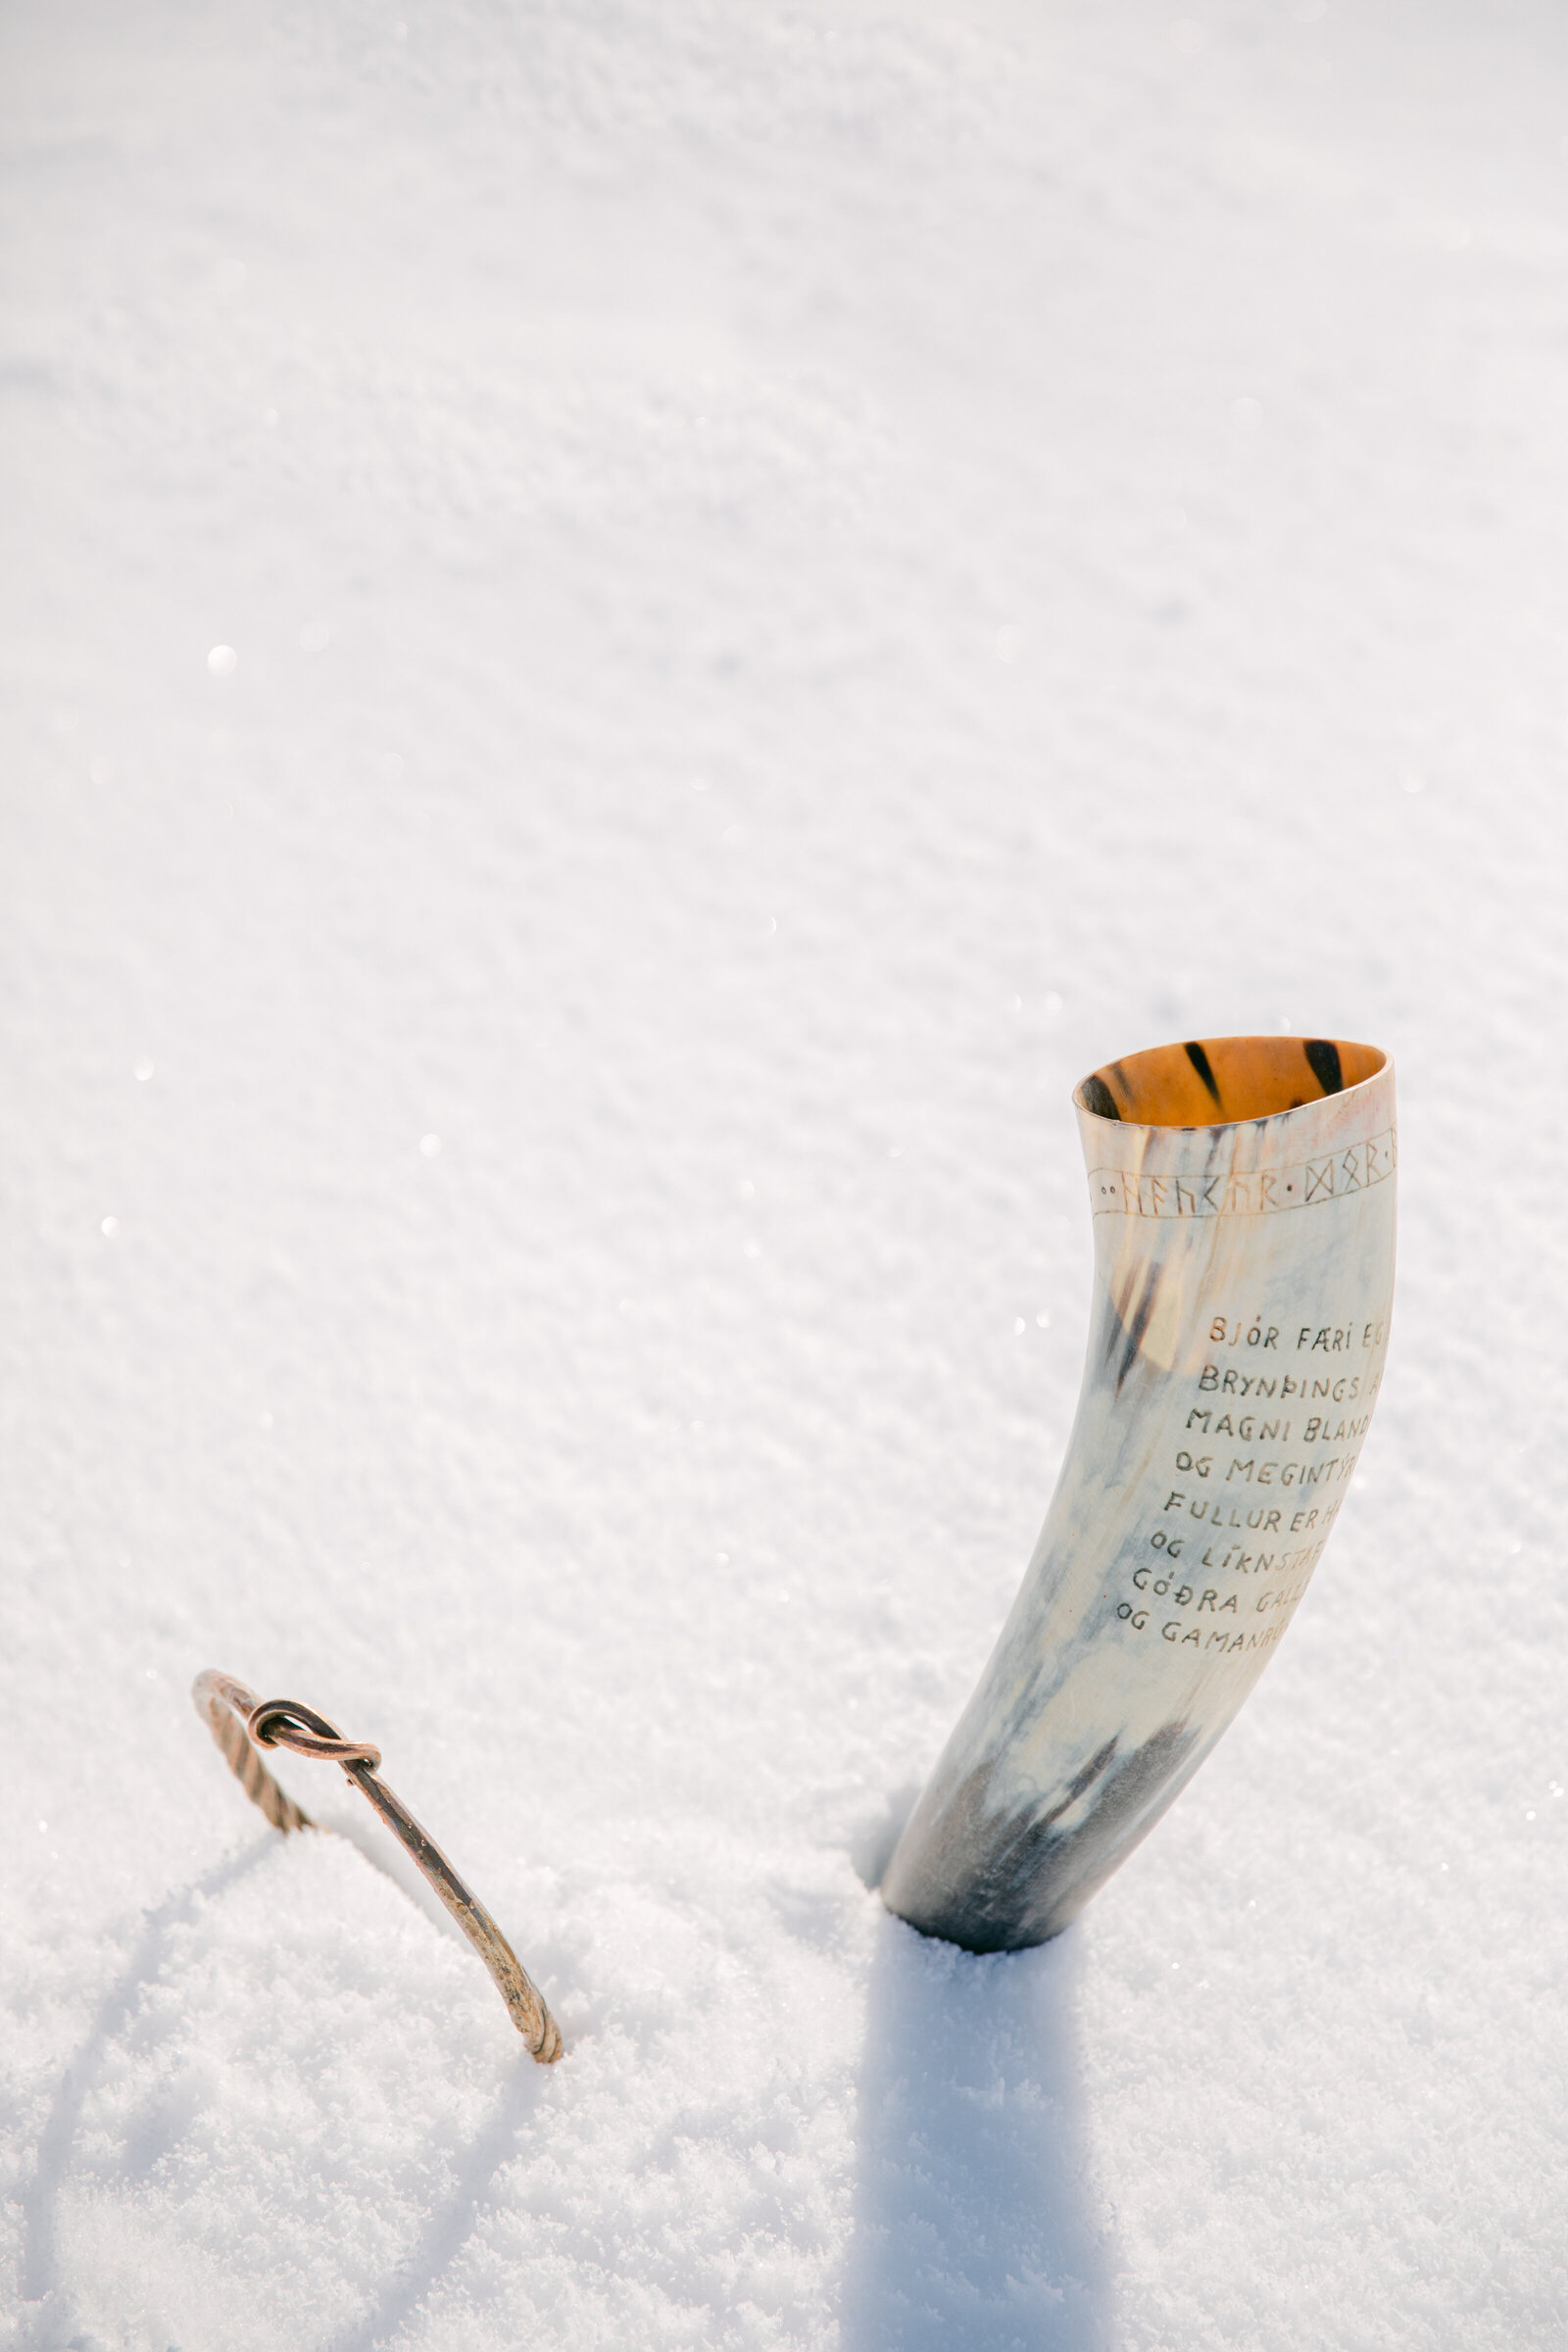 horn mug in the snow on a glacier in iceland